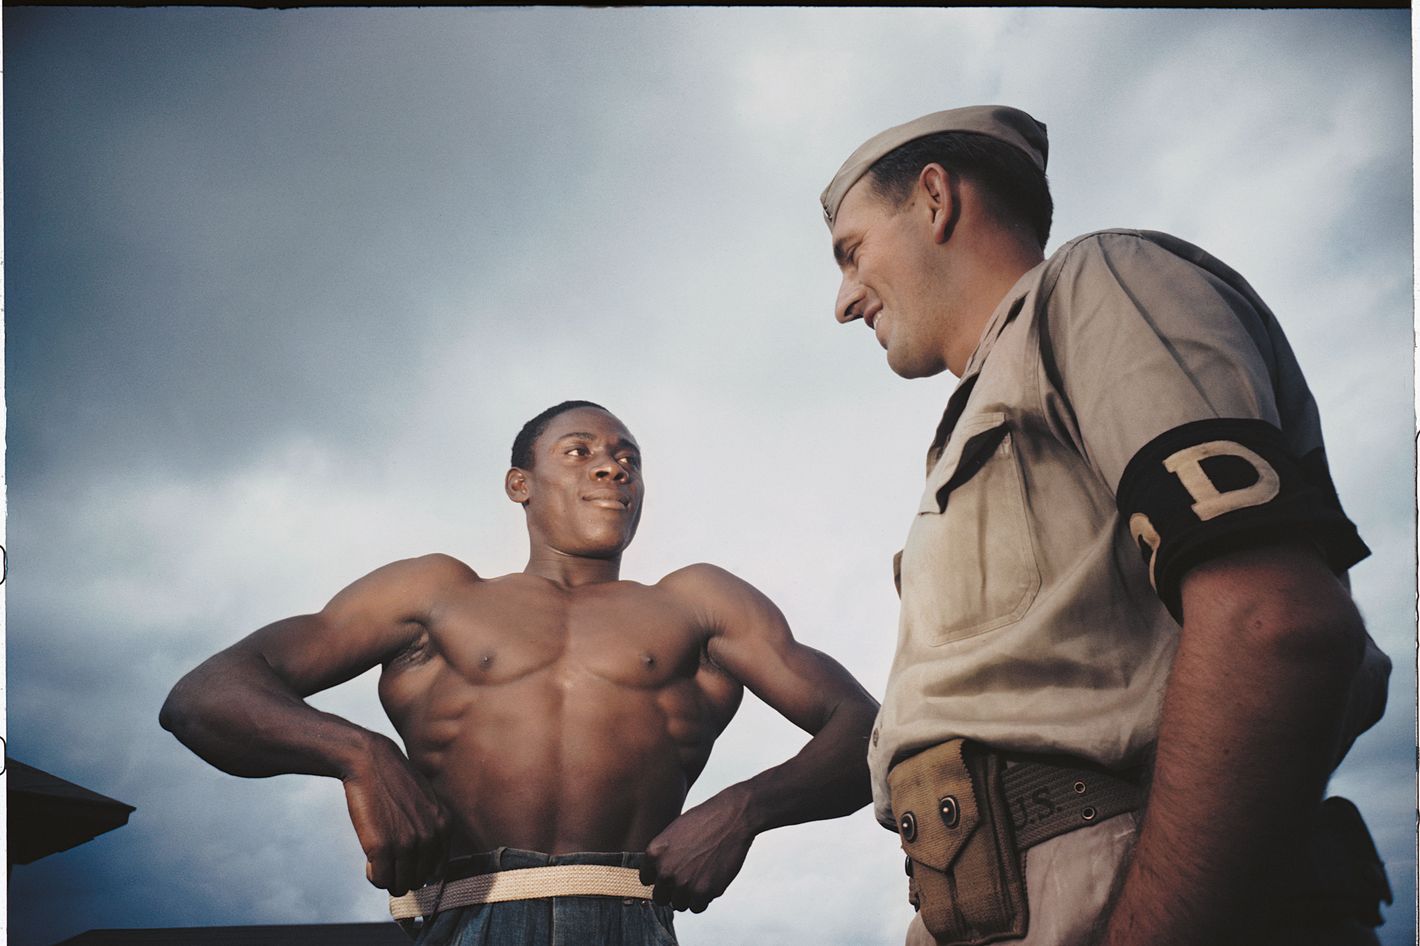 World War Ii Nudes - 10 Intimate Photographs of World War II Soldiers in the Buff